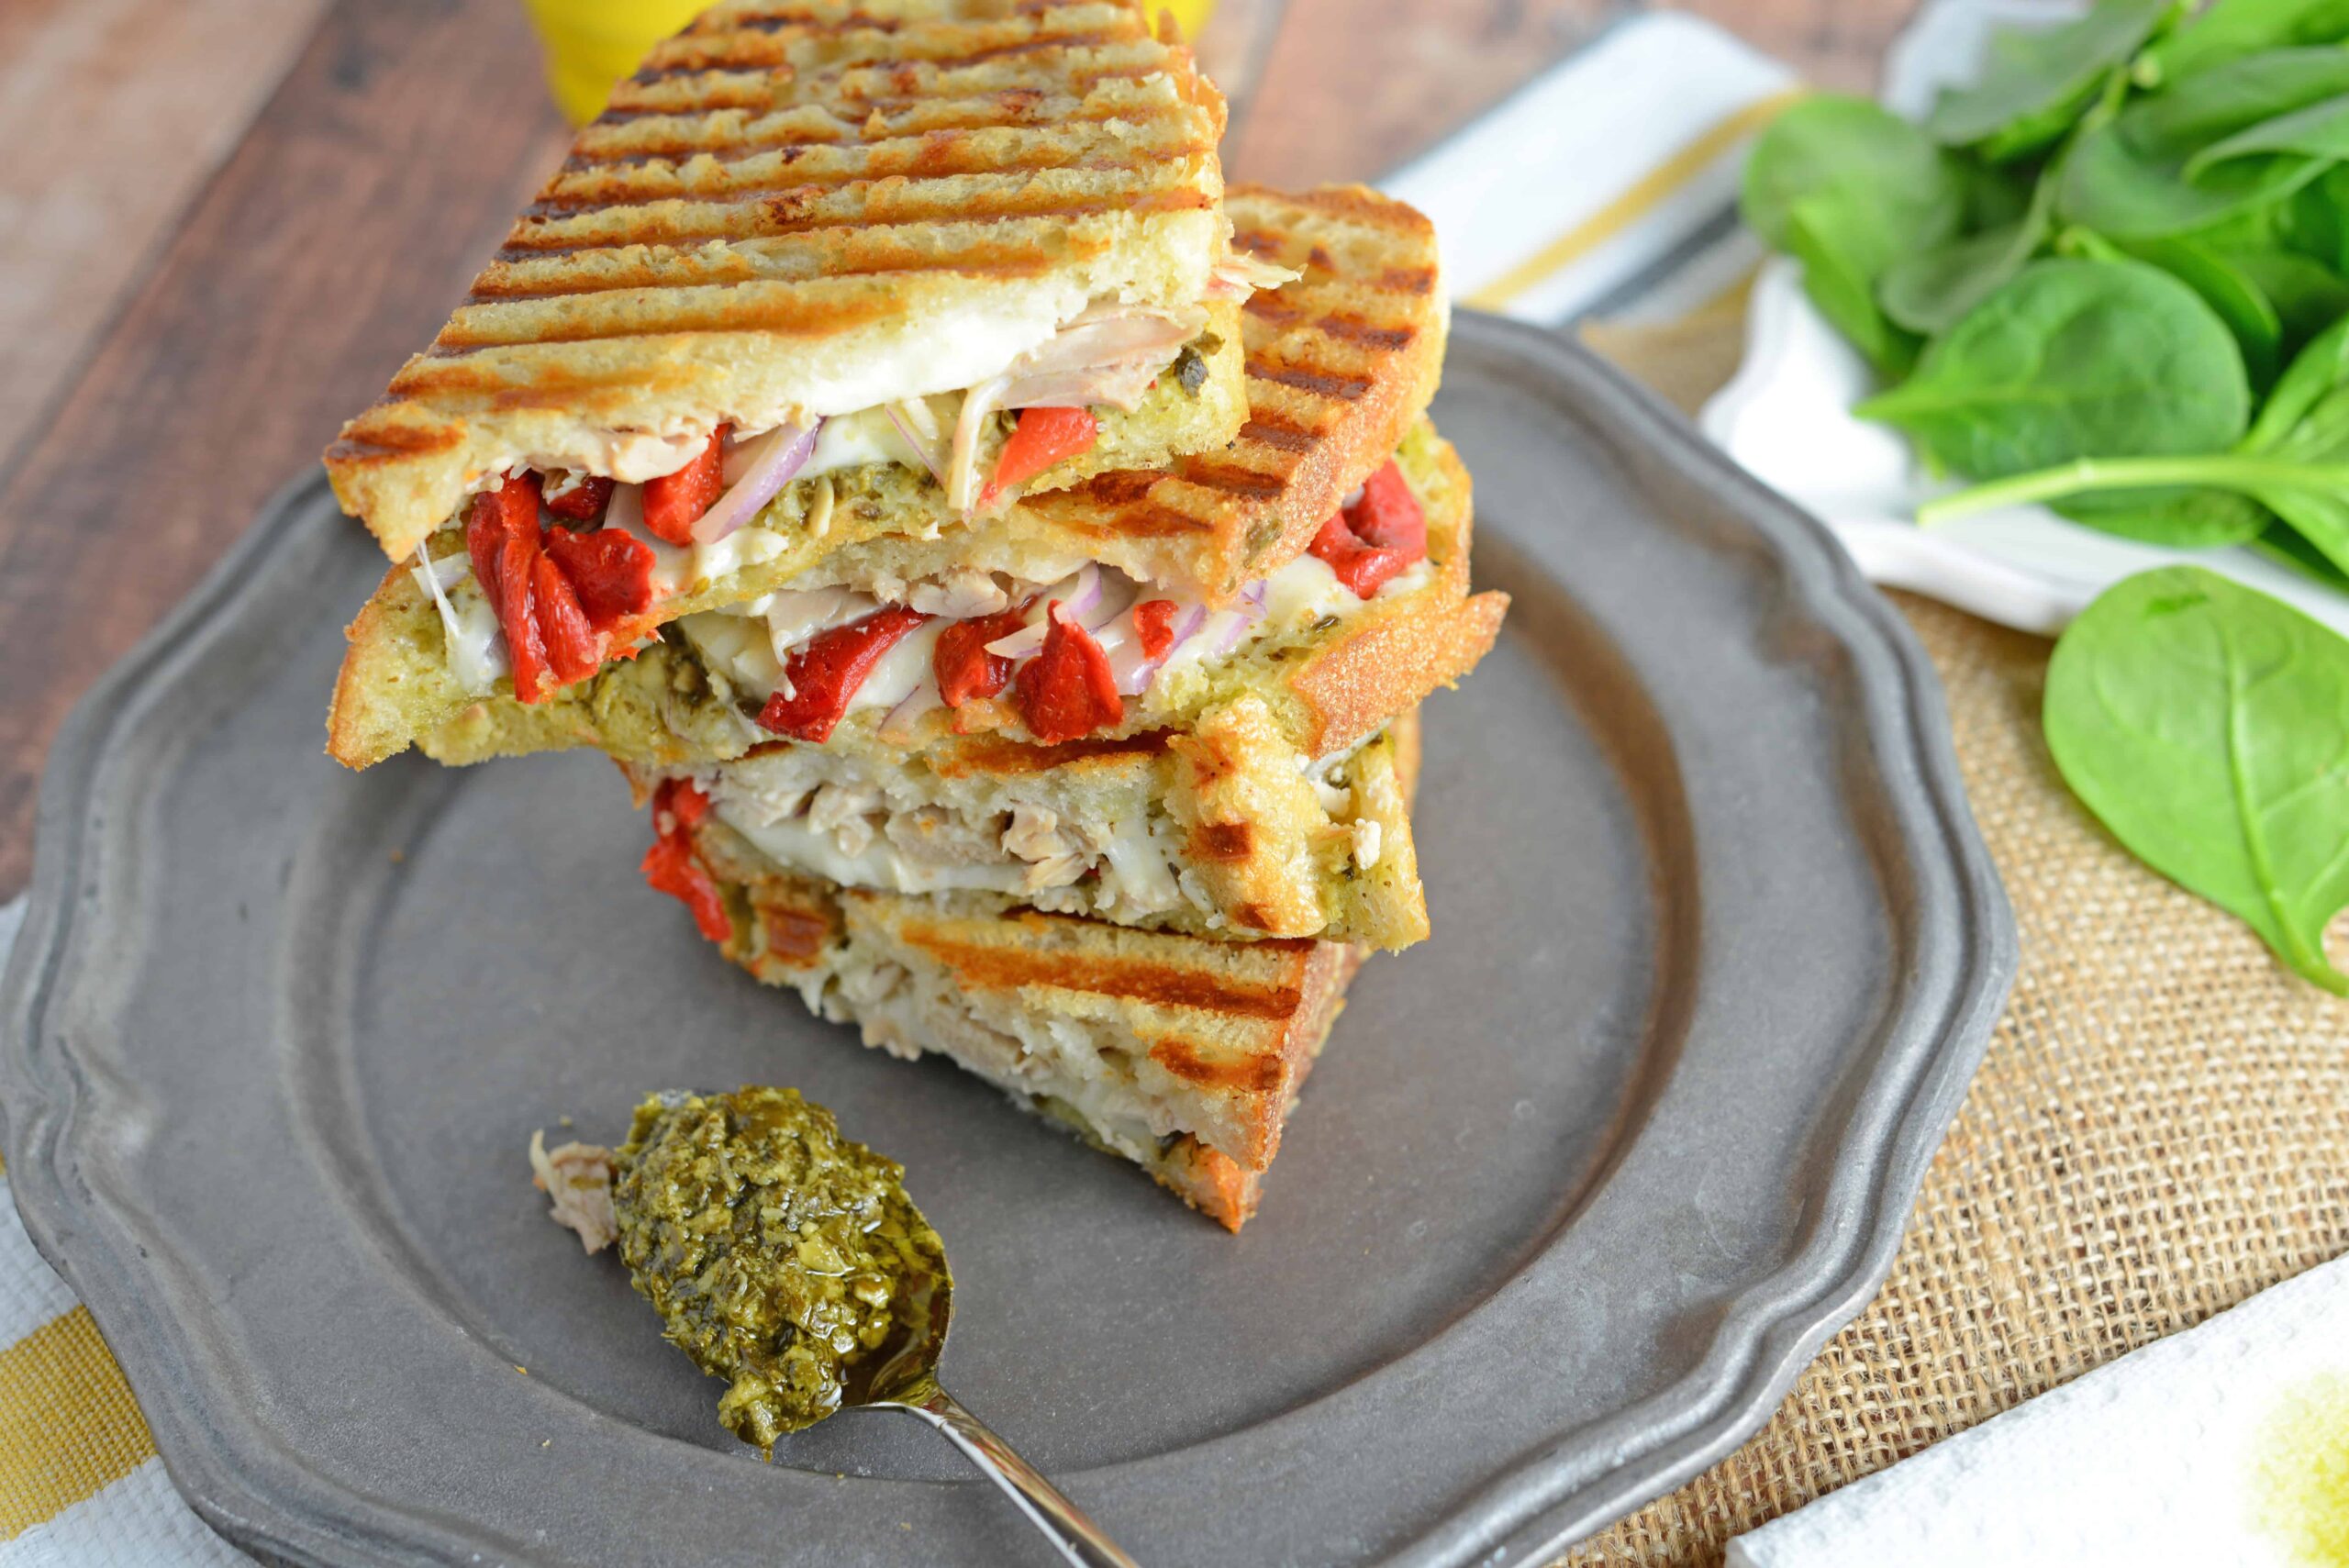 Italian Chicken Panini Recipe - Crusty bread filled with gooey mozzarella cheese, roasted red pepper, shredded chicken and lots and lots of garlicky pesto. www.savoryexperiments.com